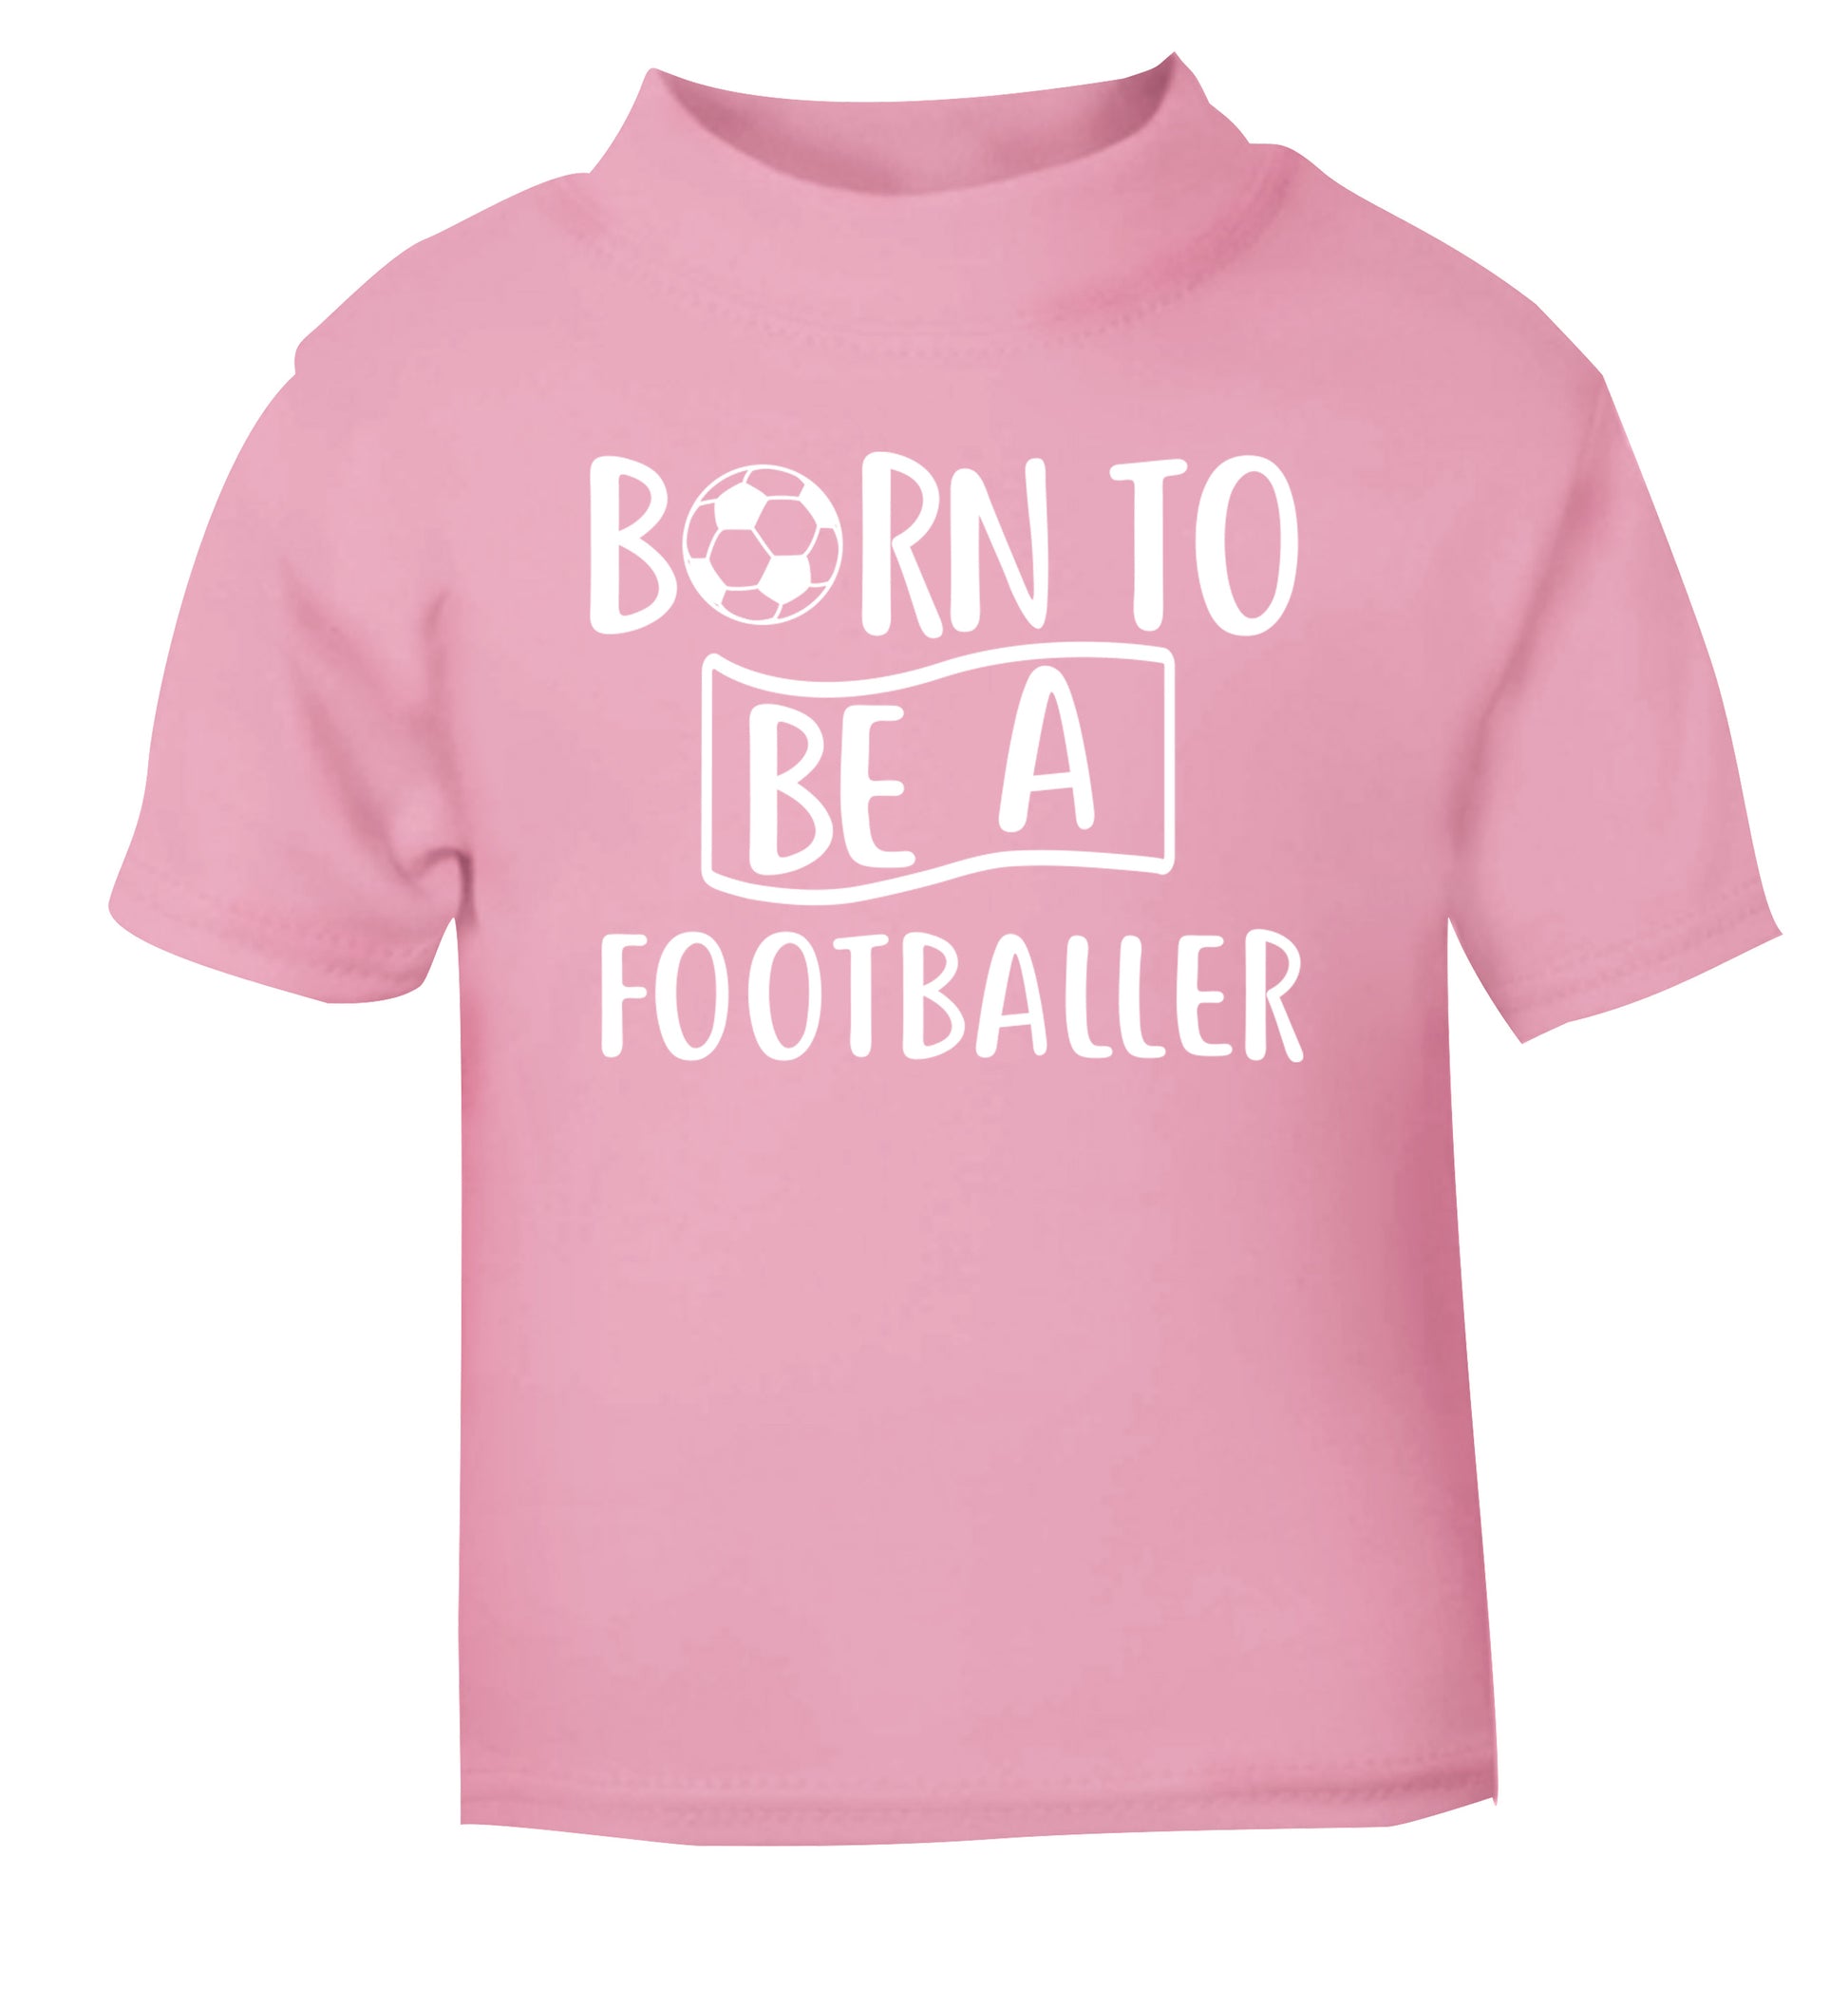 Born to be a footballer light pink Baby Toddler Tshirt 2 Years